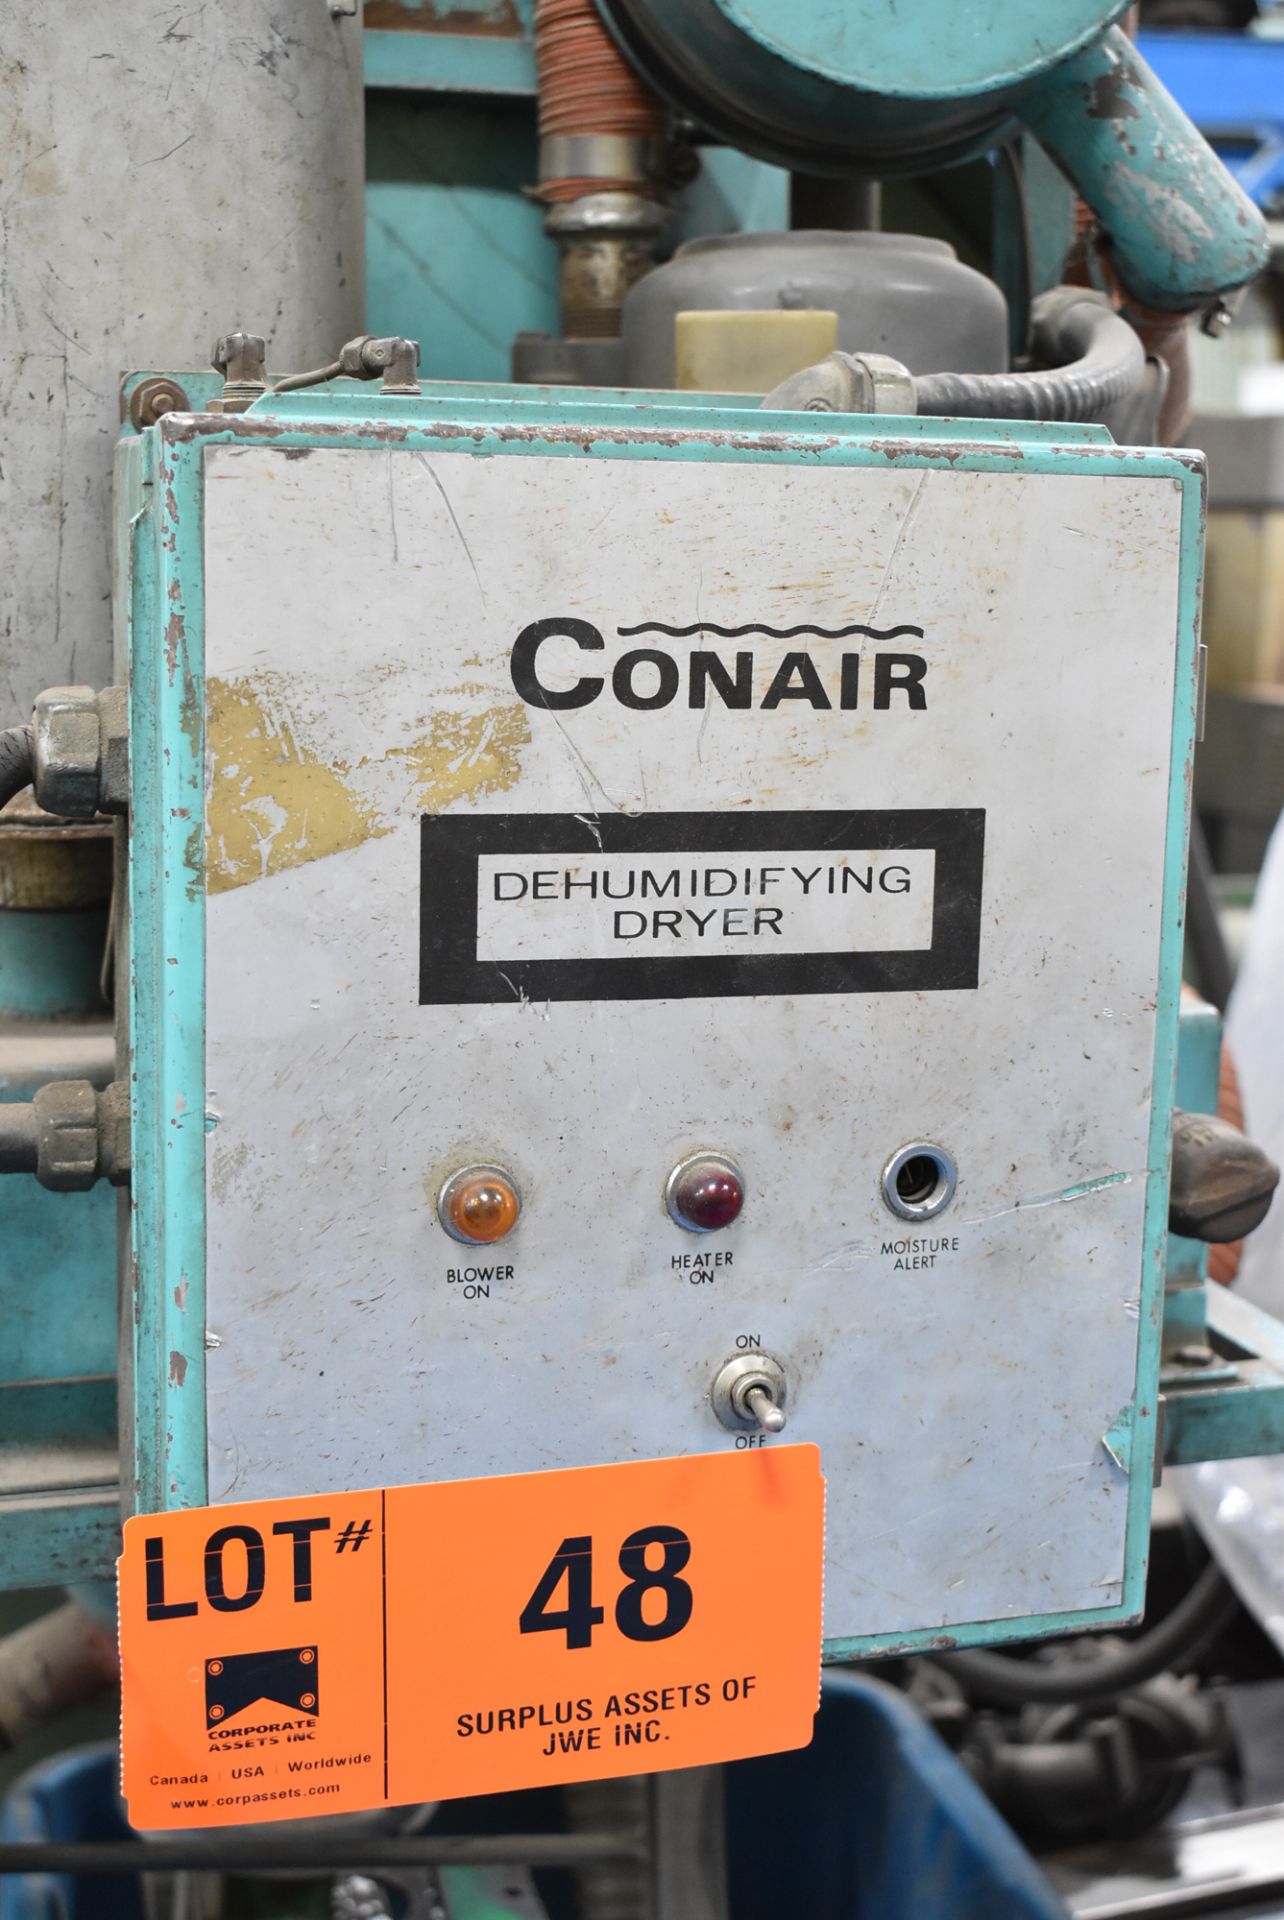 CONAIR DEHUMIDIFYING DRYER WITH PNEU-CON VACUUM SYSTEM, S/N: N/A (CI) - Image 4 of 4